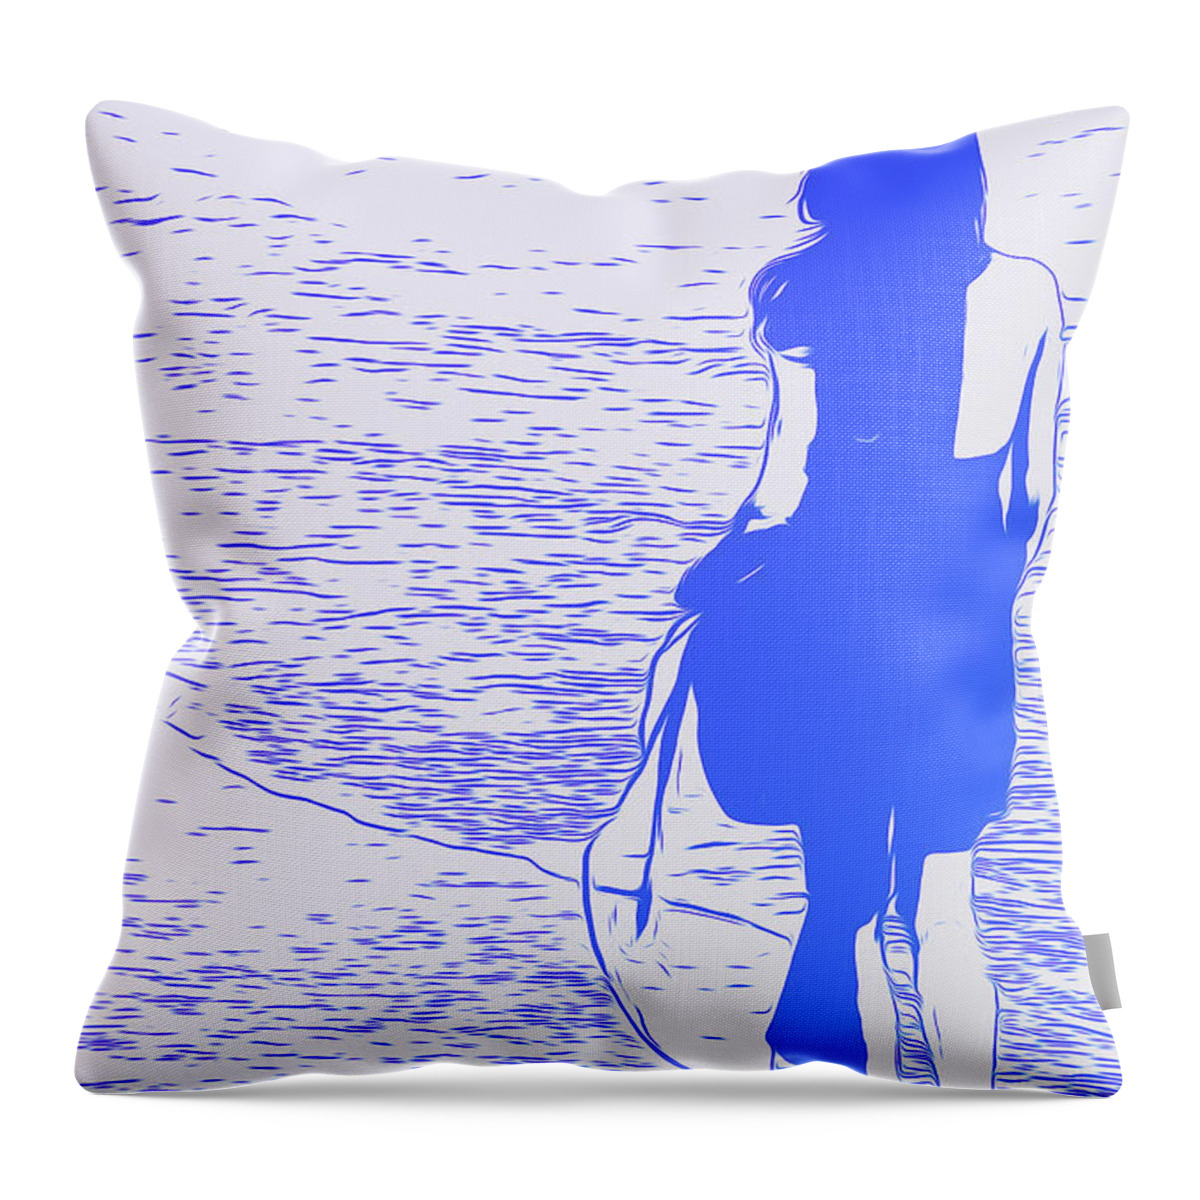 Silent Throw Pillow featuring the painting Walking by the Dreams by AM FineArtPrints